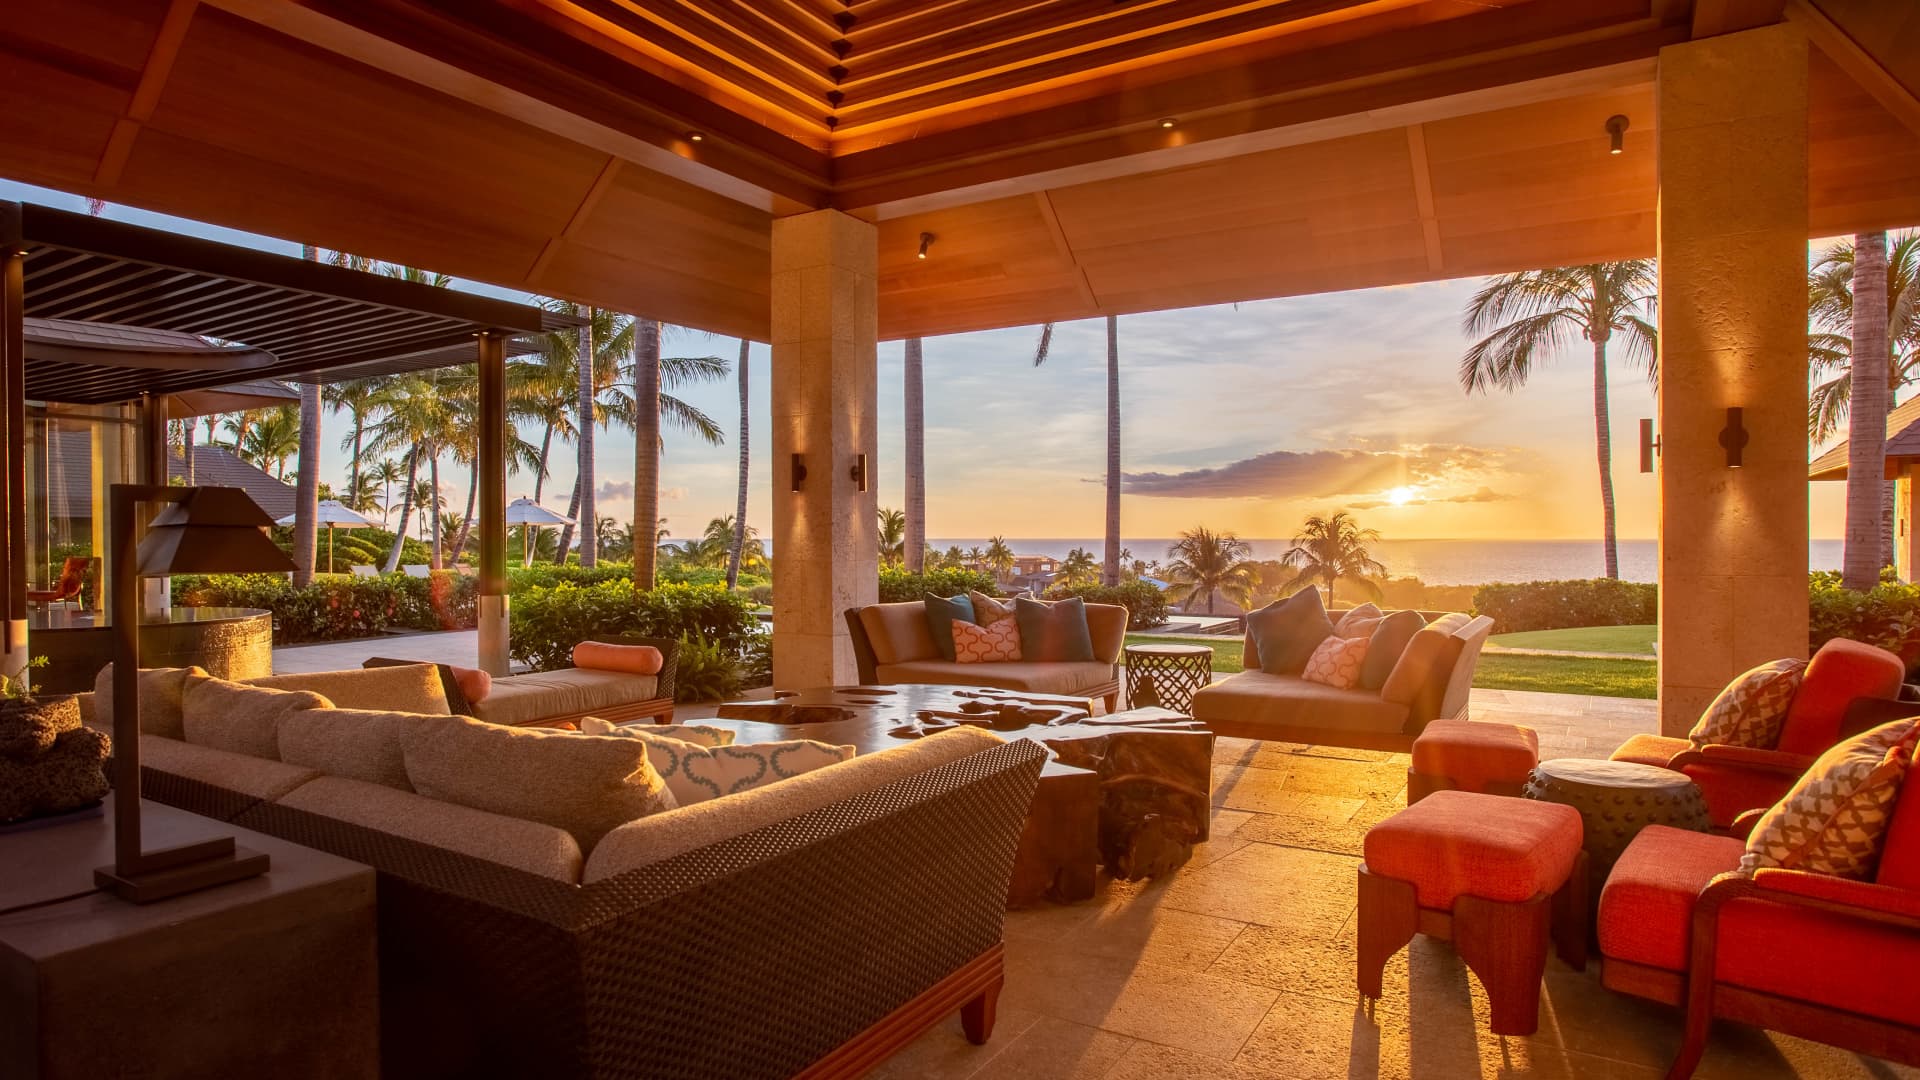 This private residence perched above Kauna'oa Bay on the Big Island recently sold for $18.5 million.